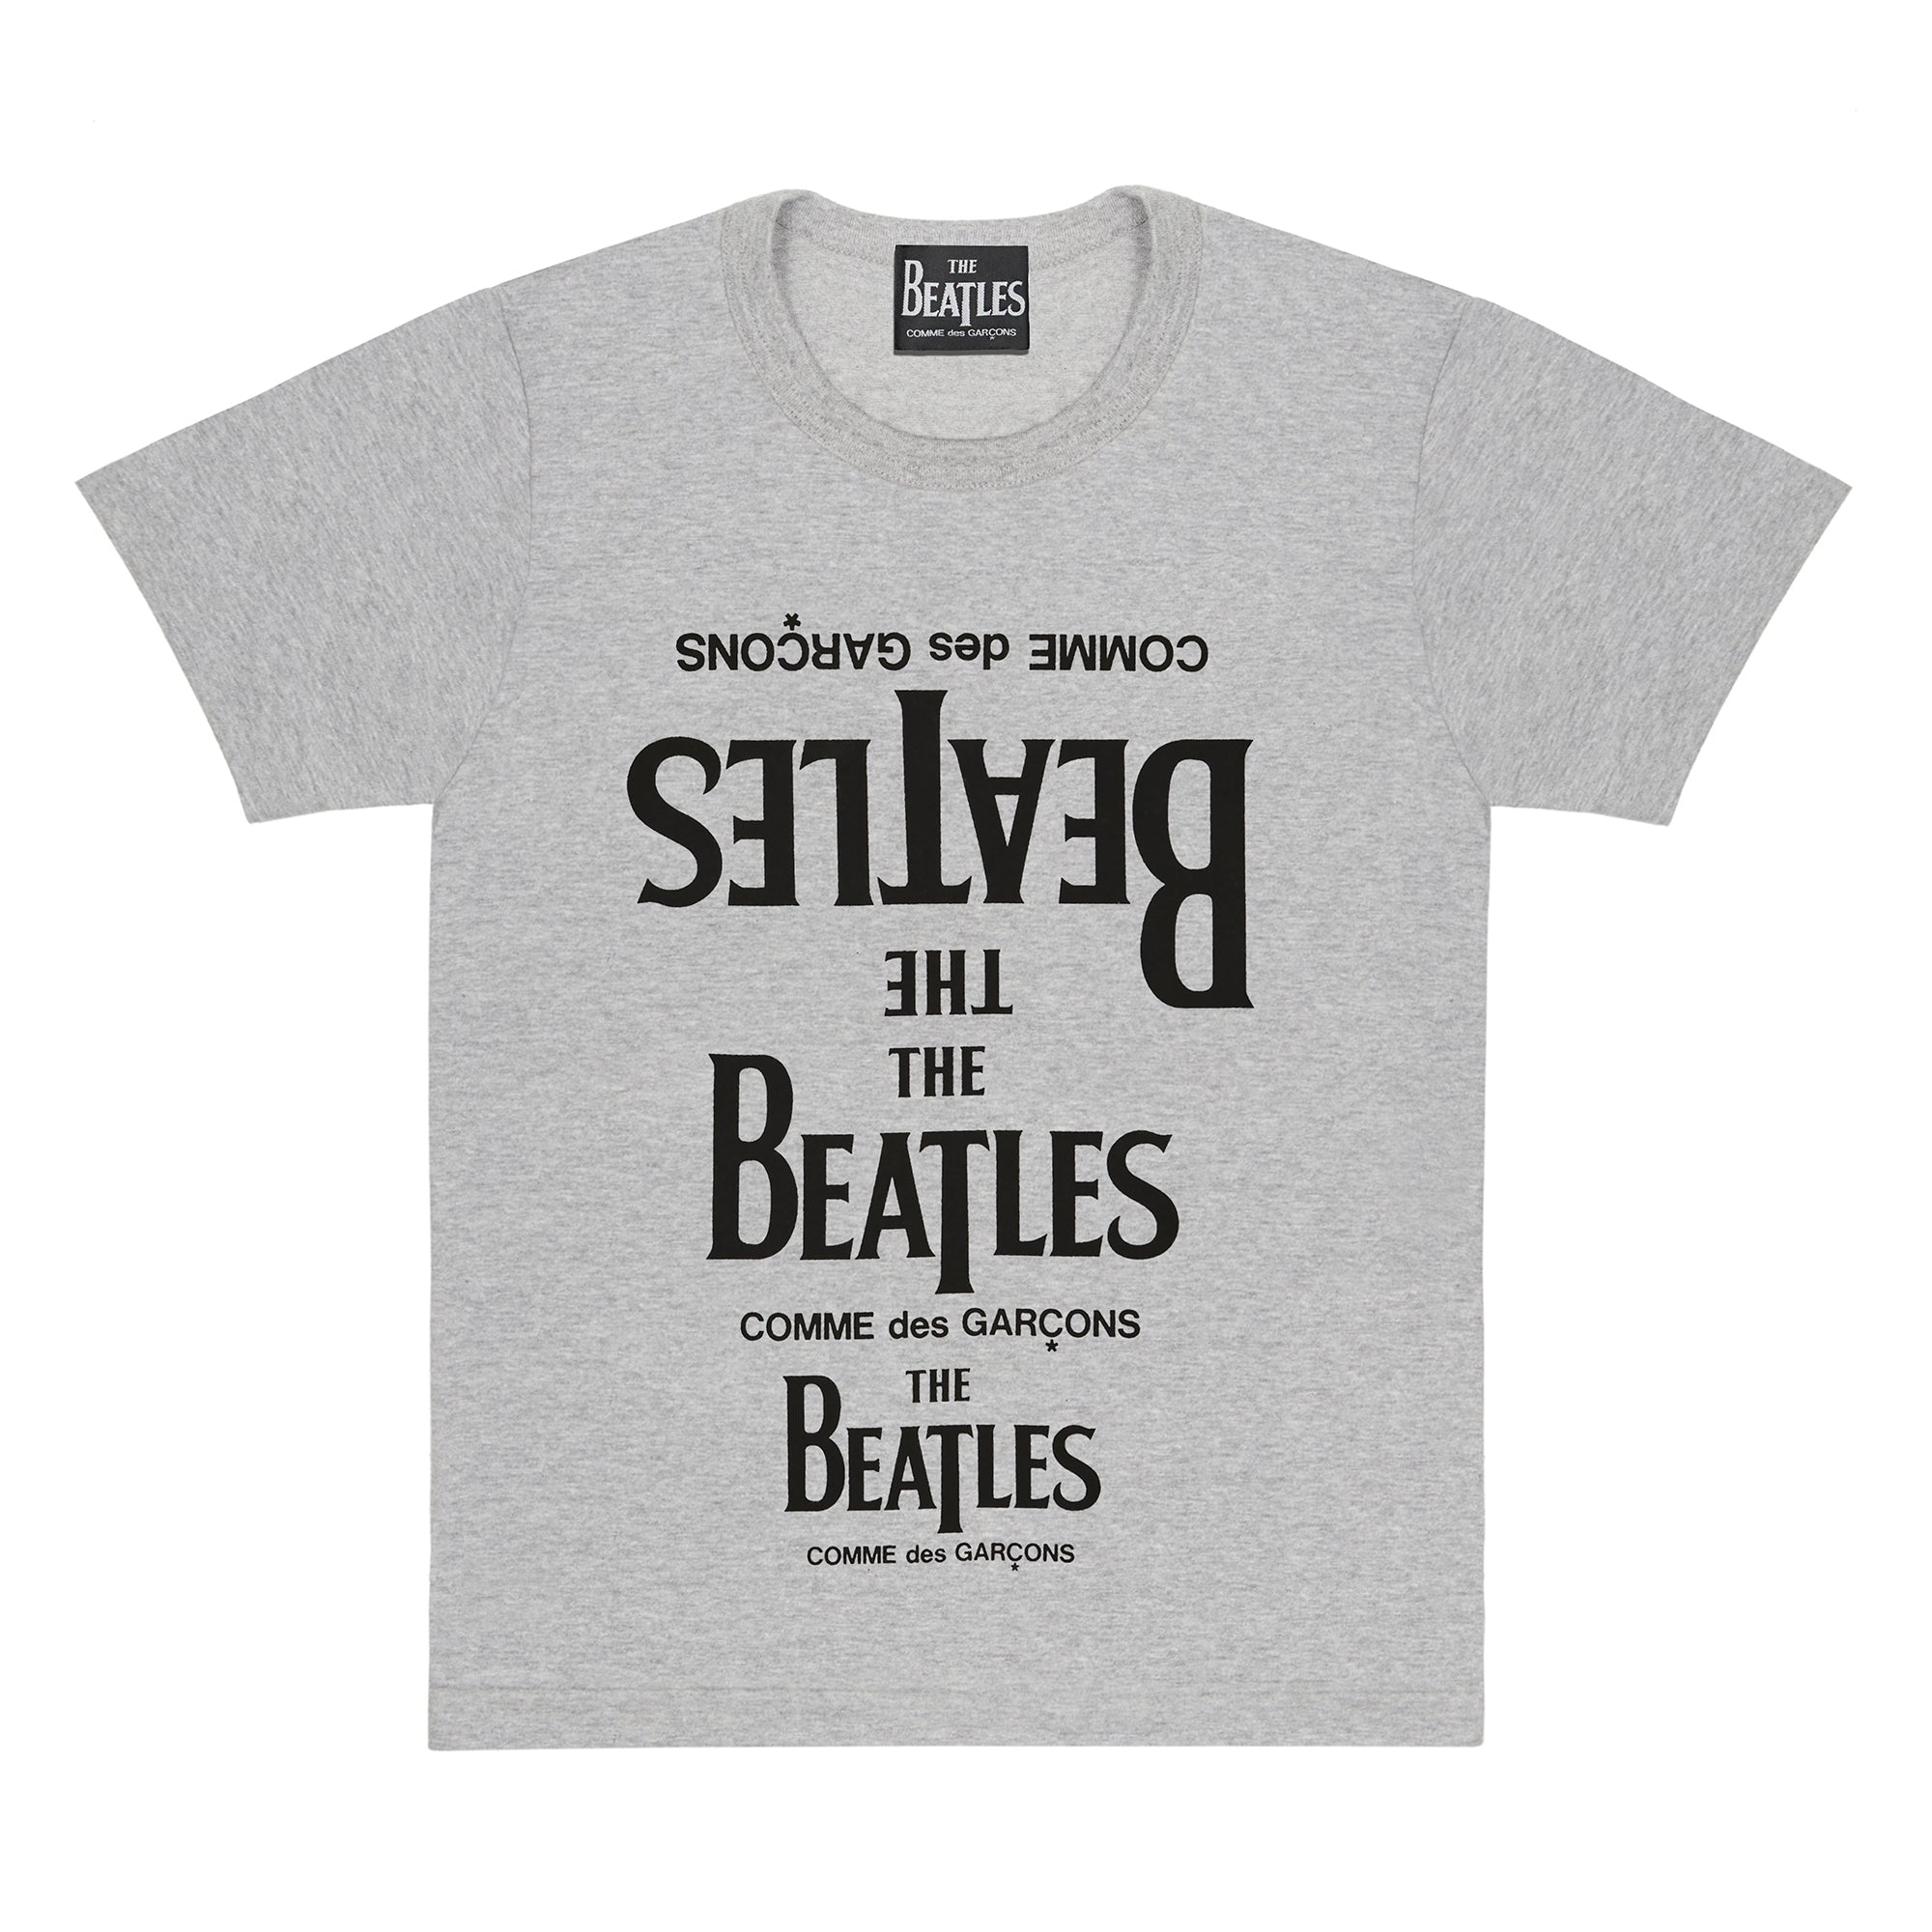 The Beatles CDG - Rubber Printed T-Shirt - (Grey) - (VT-T001-051) view 1